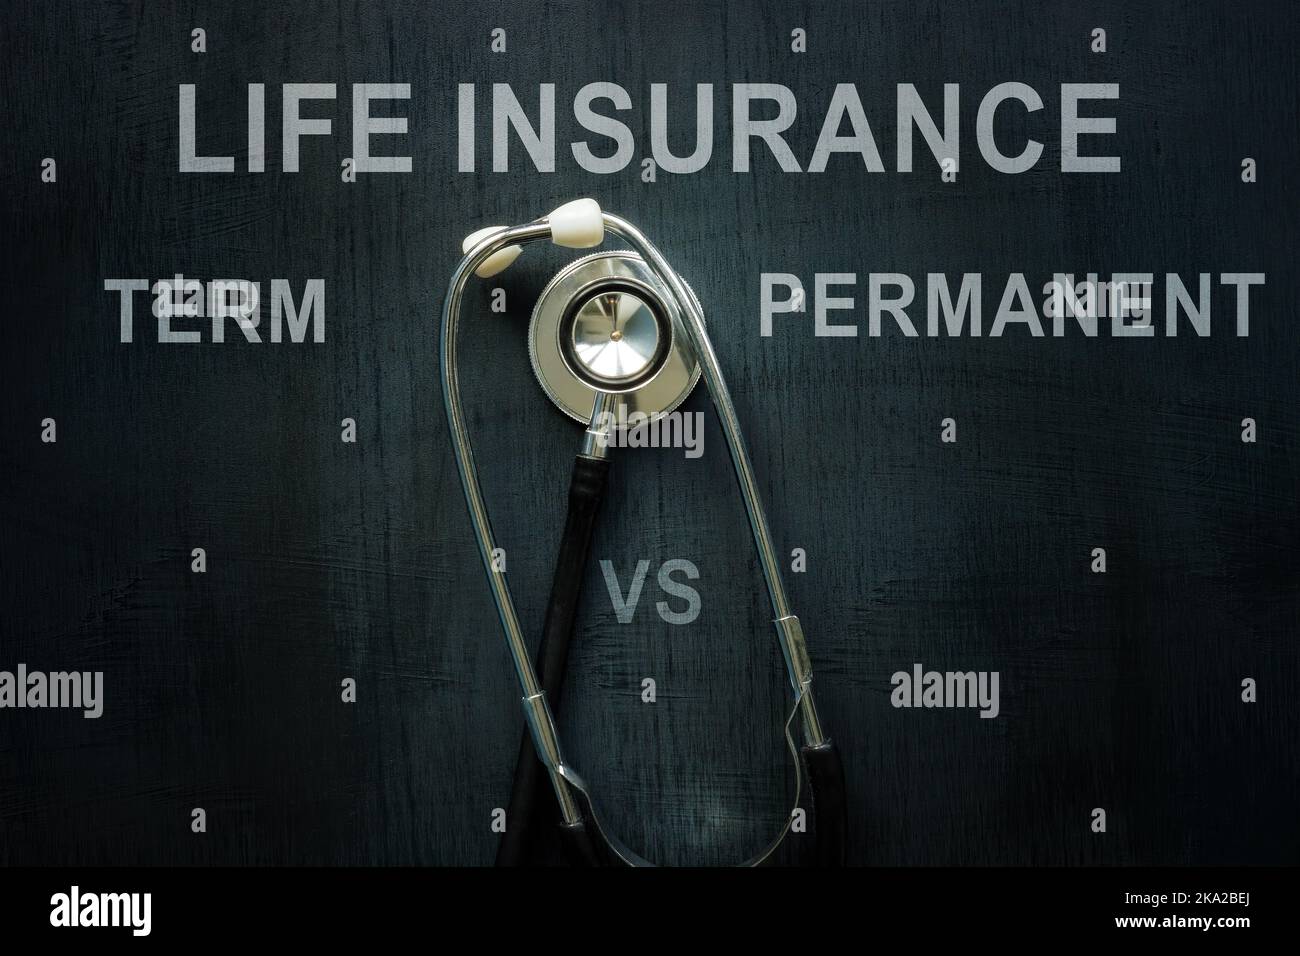 Stethoscope and words on the desk Life insurance term vs permanent. Stock Photo